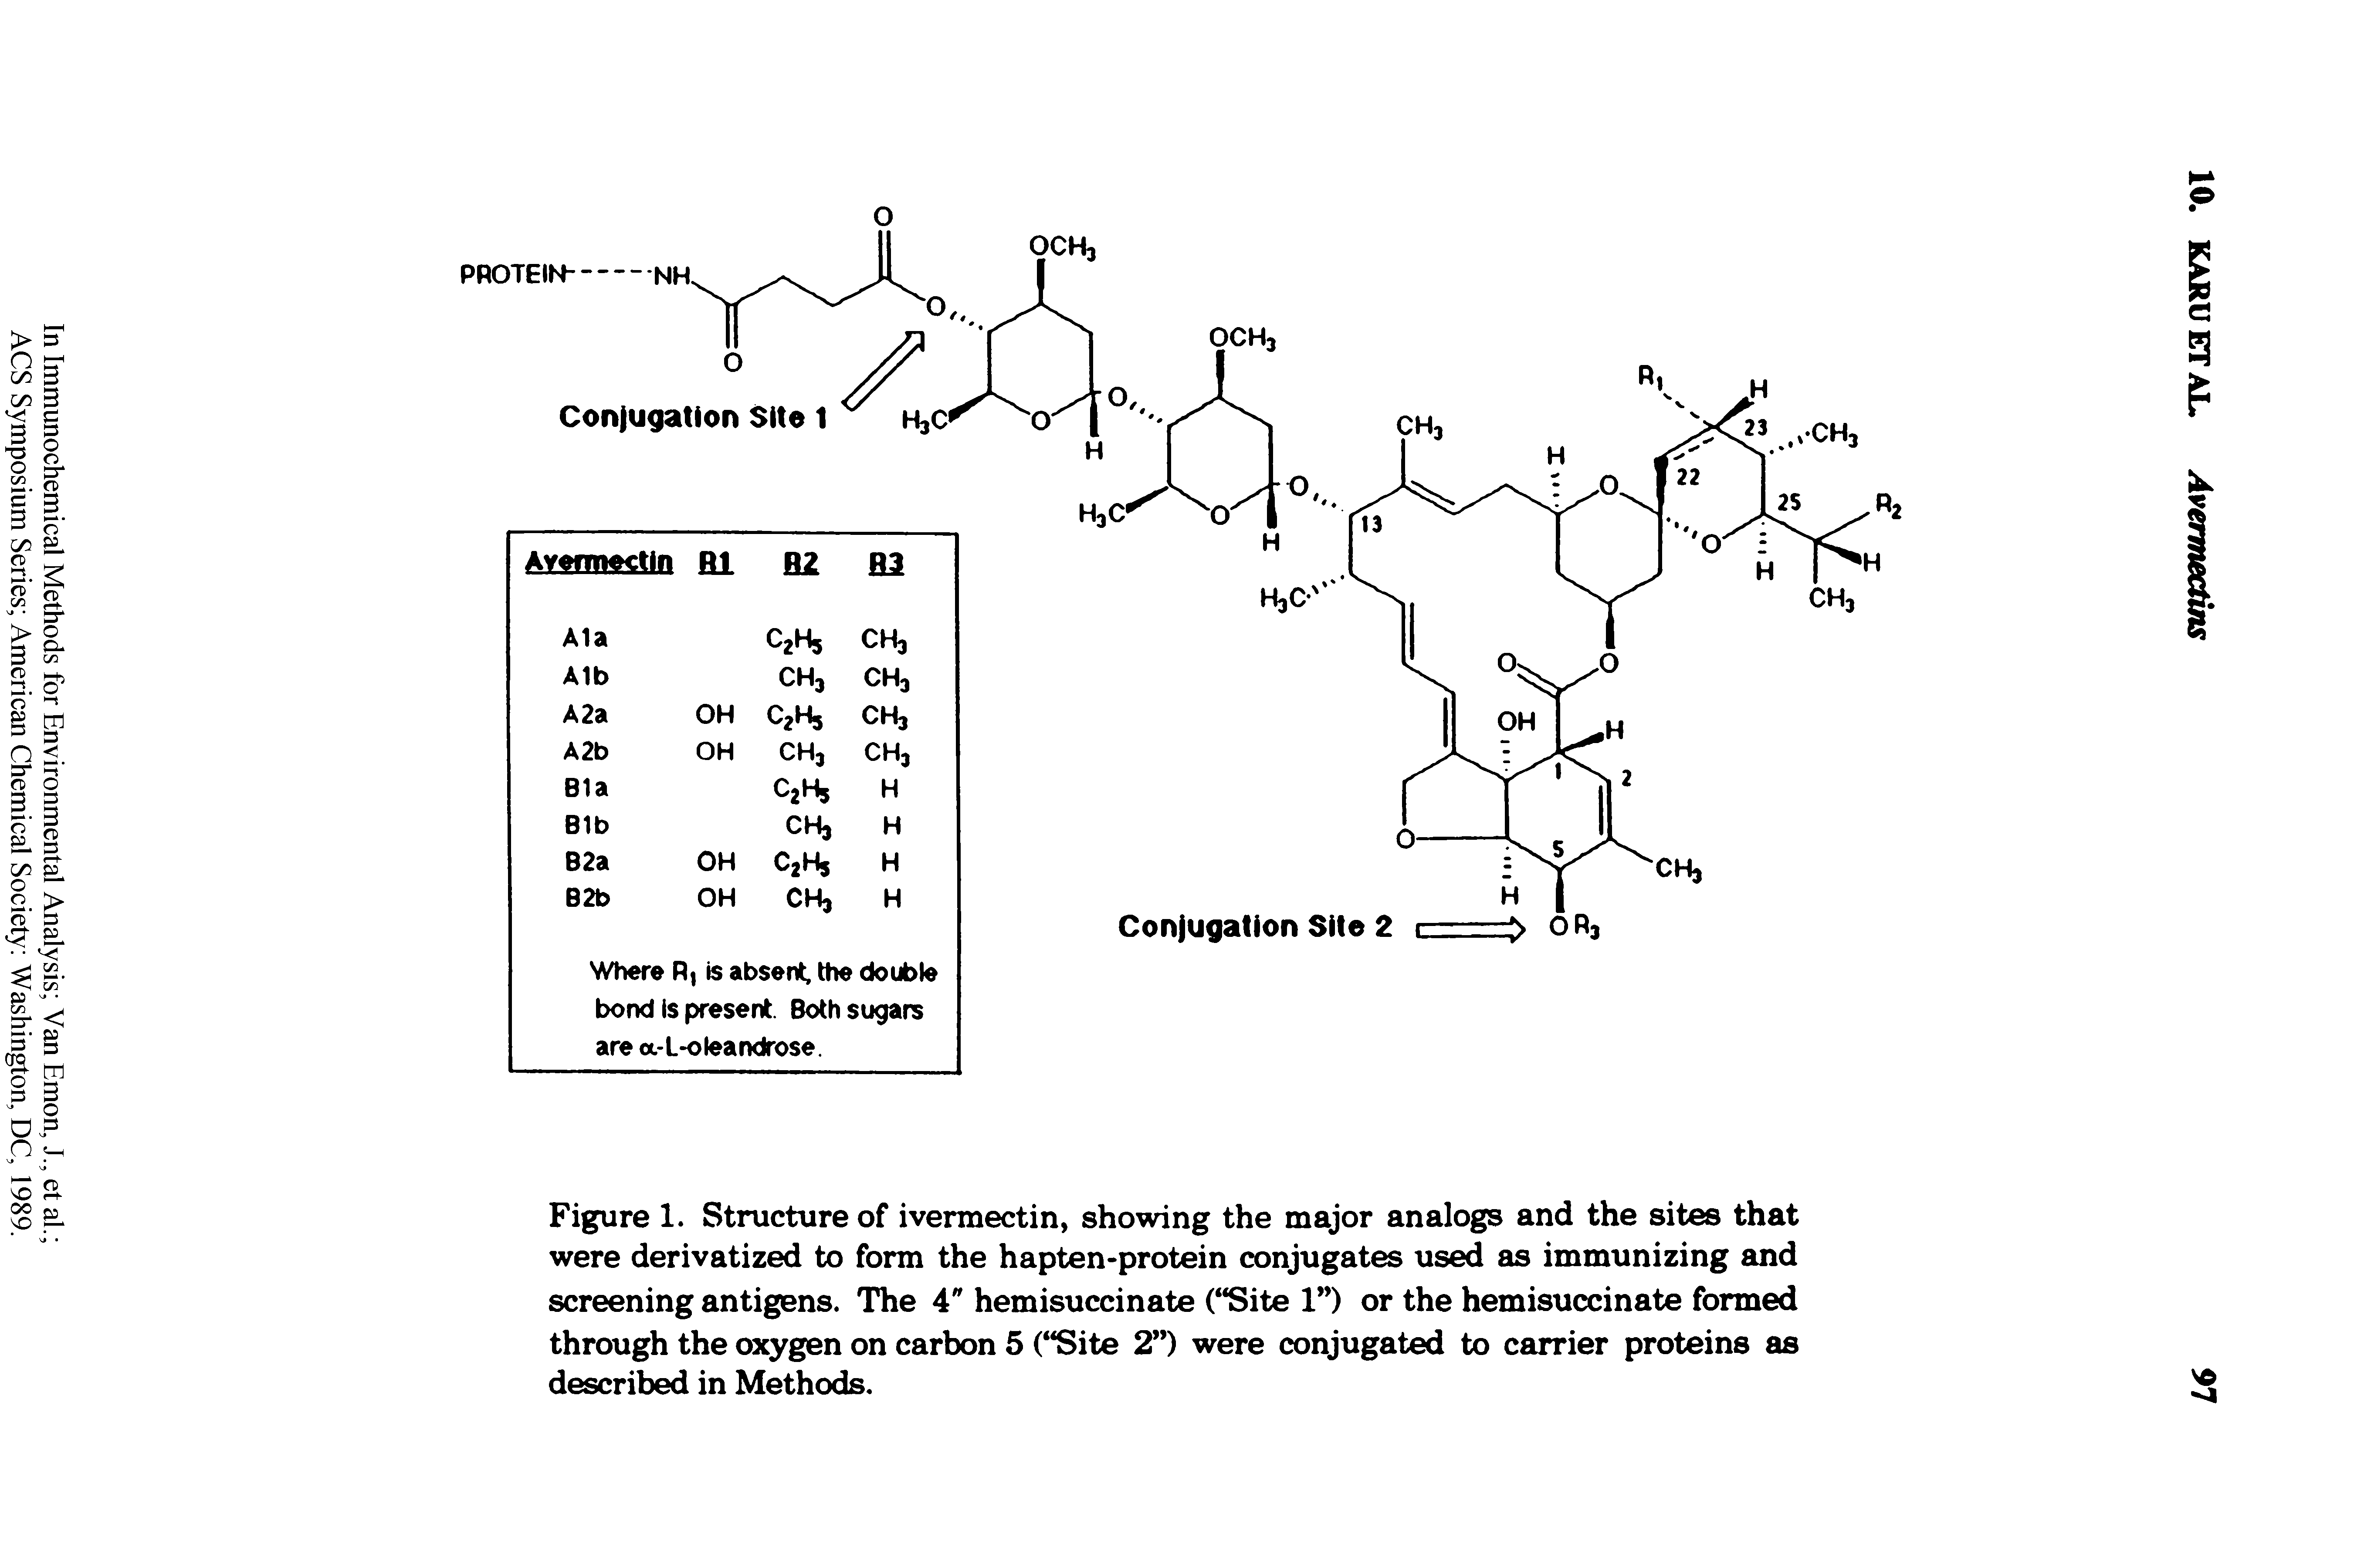 Figure 1. Structure of ivermectin, showing the major analogs and the sites that were derivatized to form the hapten-protein conjugates used as immunizing and screening antigens. The 4" hemisuccinate ( Site 1 ) or the hemisuccinate formed through the oxygen on carbon 5 ( Site 2 ) were conjugated to carrier proteins as described in Methods.